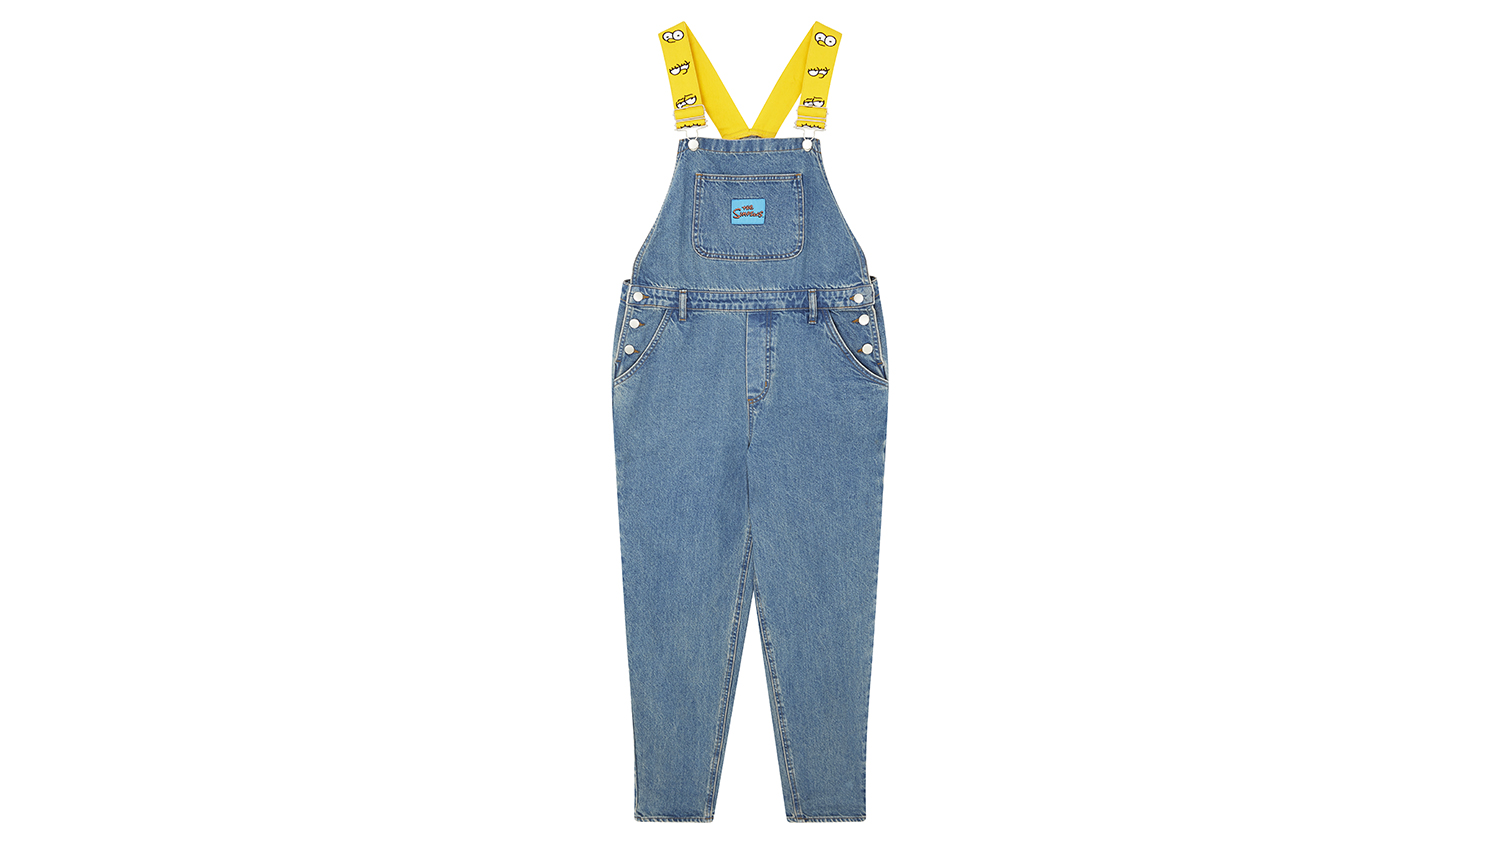 asos x the simpsons collection overalls